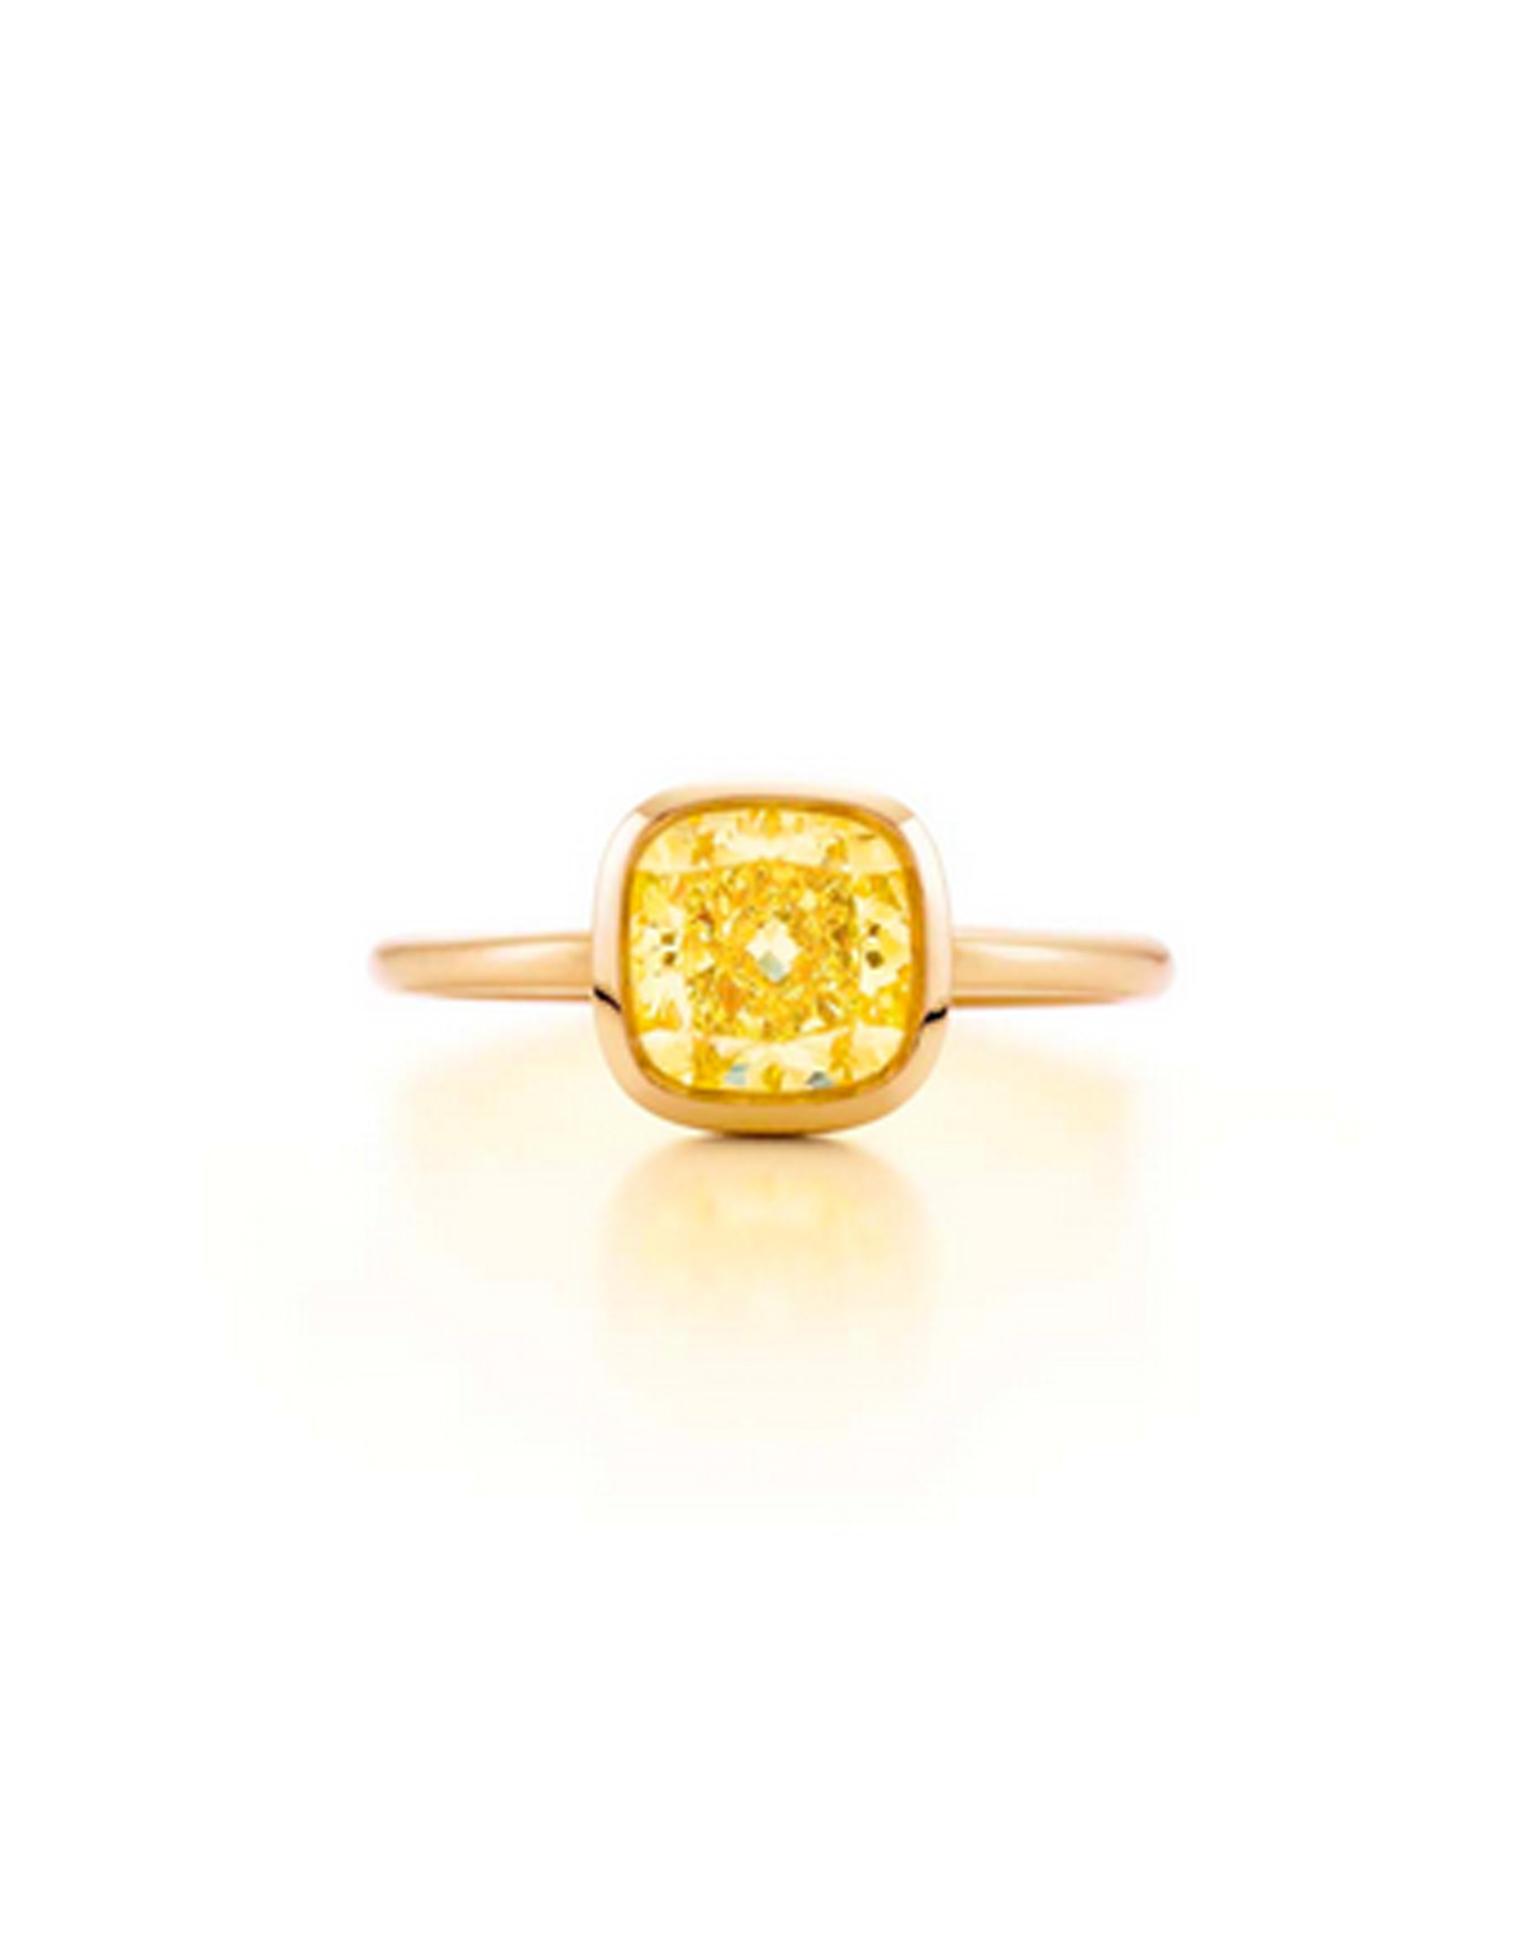 Tiffany cushion-cut yellow diamond engagement ring in pink gold (£POA).